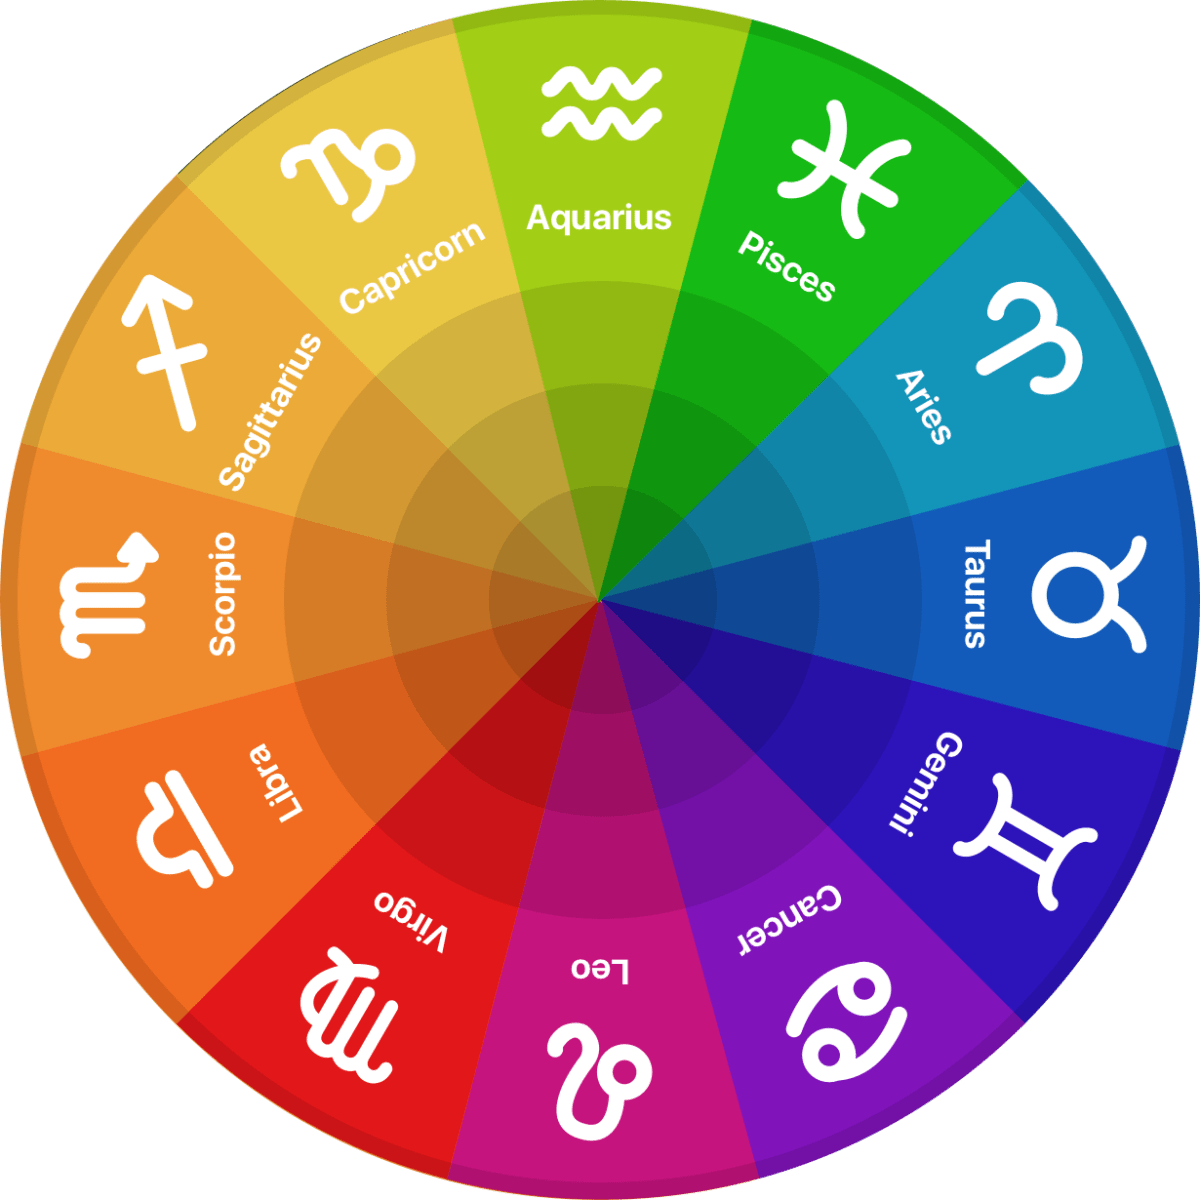 Look on the outer of the chart wheel to find what Astrological Sign your South Node is in (You can search "Astrology Signs" on Google to know what sign yours is in)